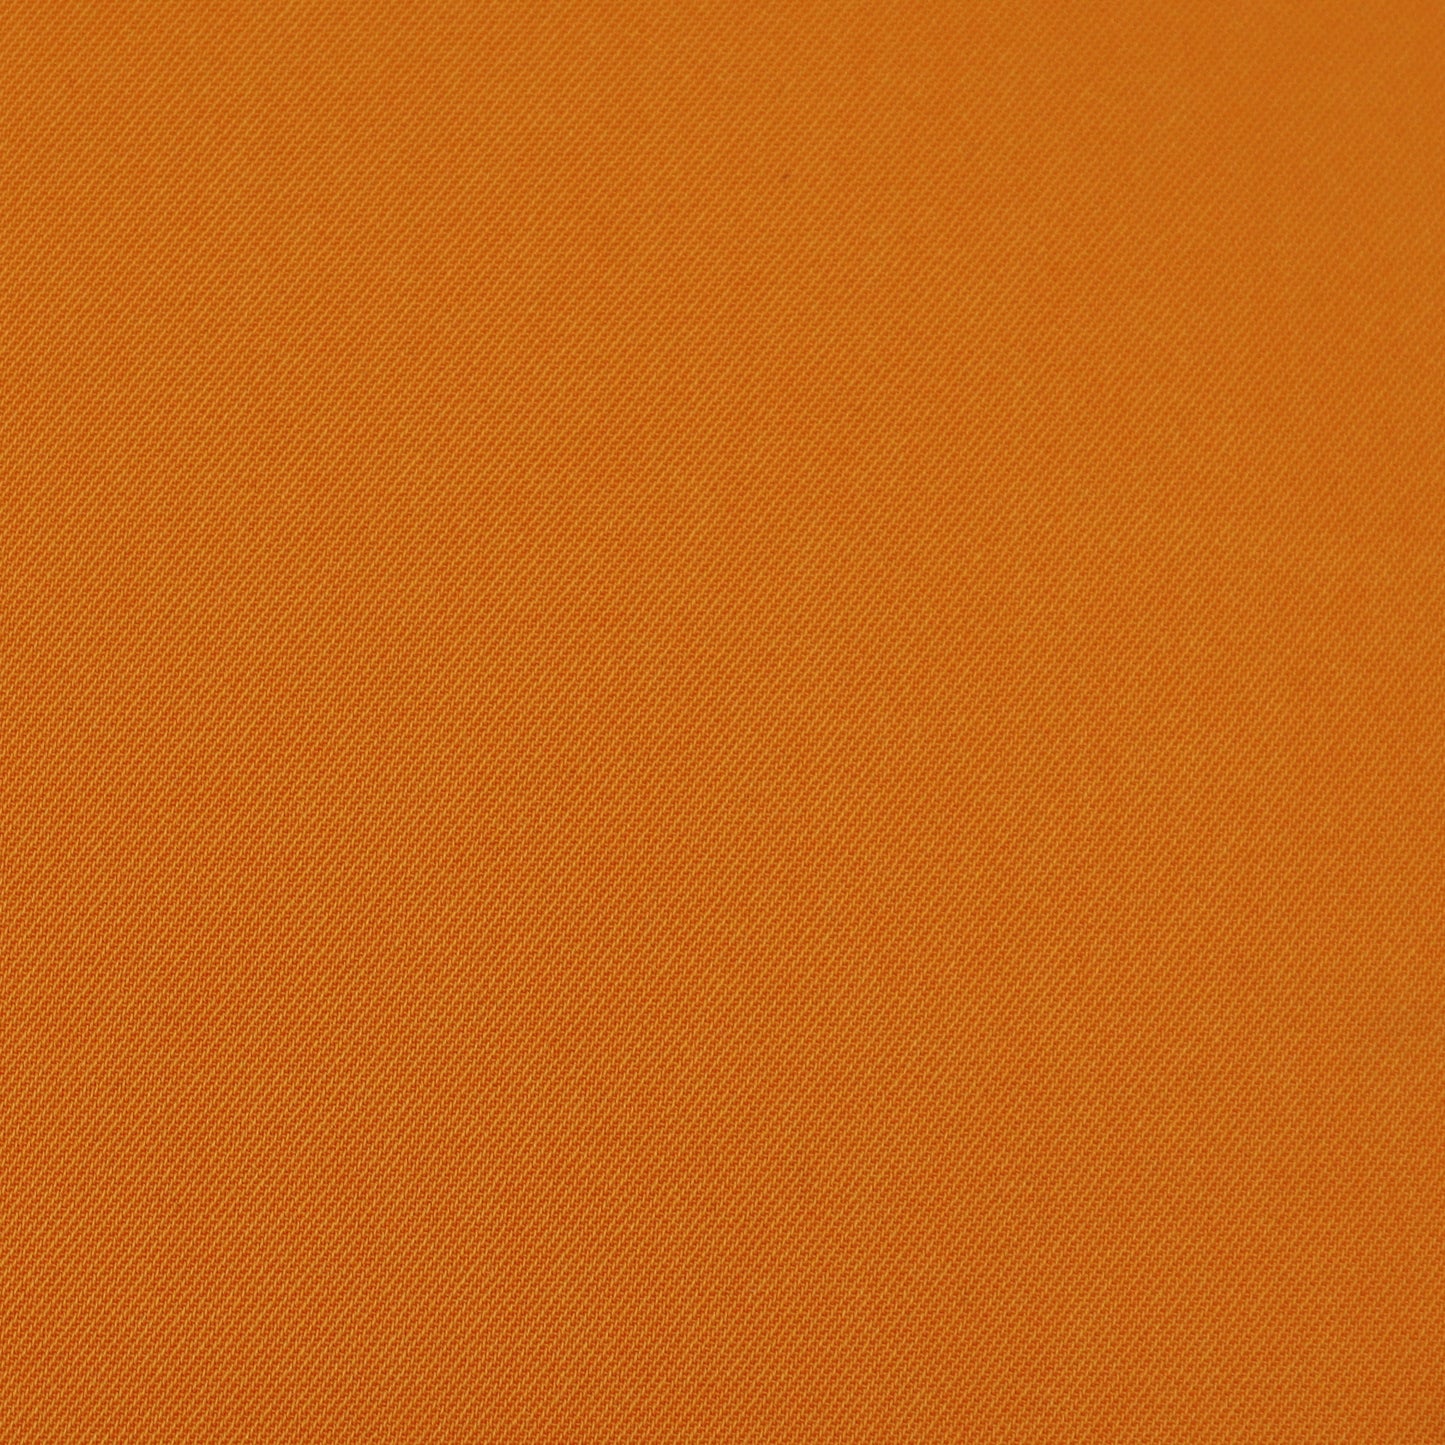 Midweight Polyester Twill in Mimosa (Orange)